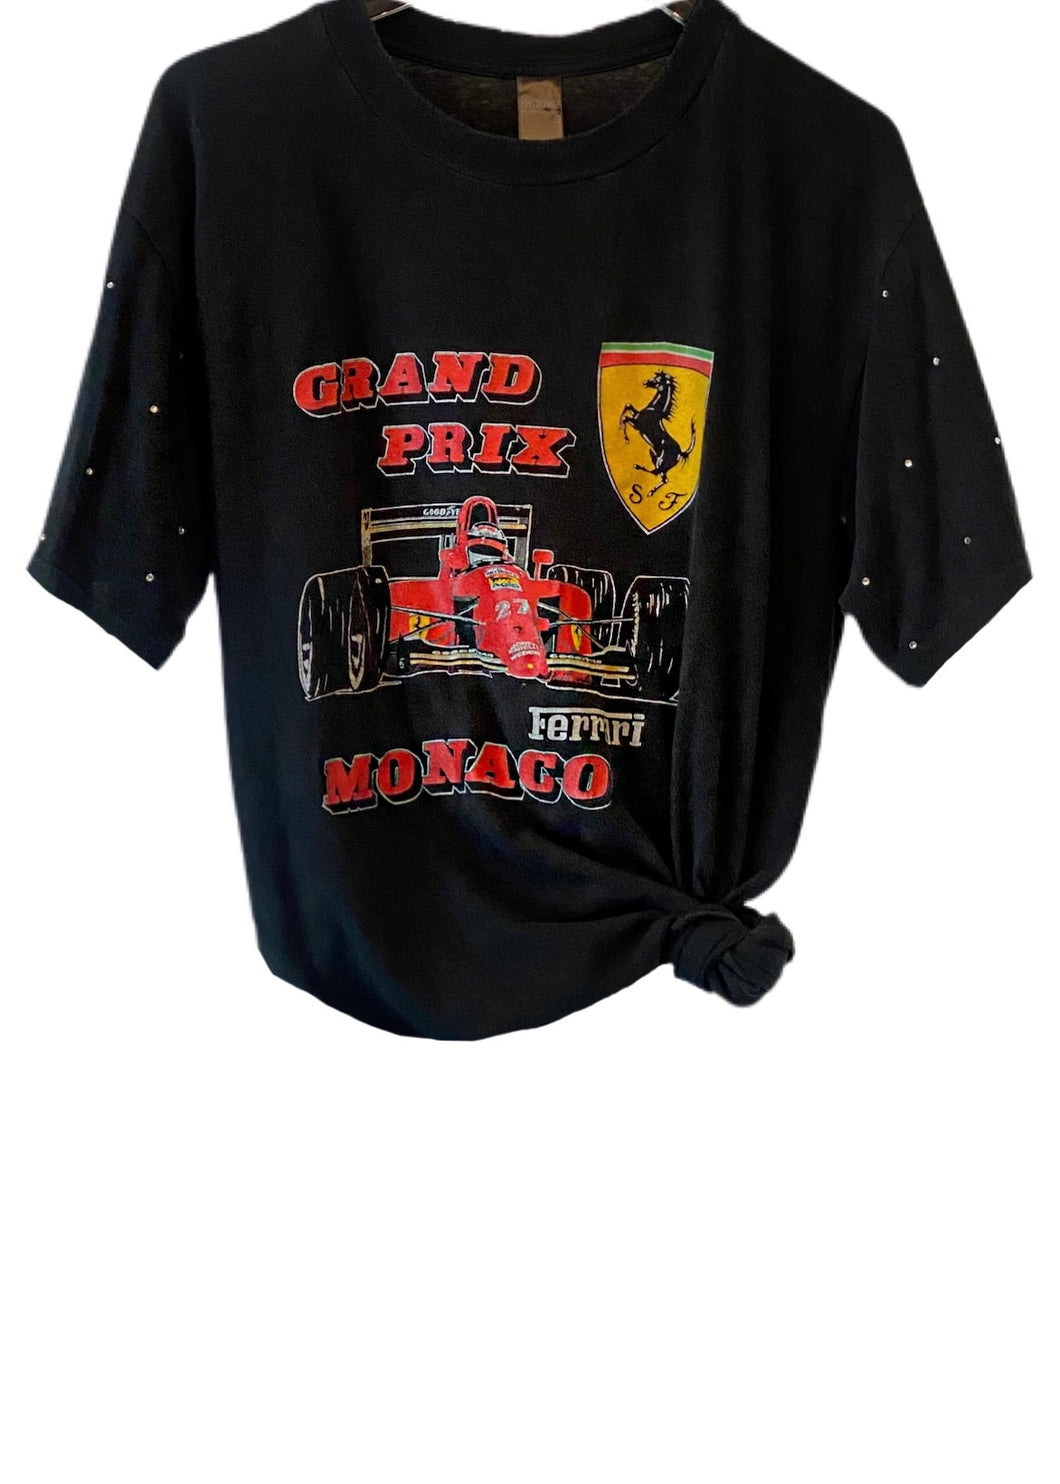 Grand Prix Monaco, “Rare Find” One of a KIND Vintage Ferrari Tee with Crystal Design on Sleeves